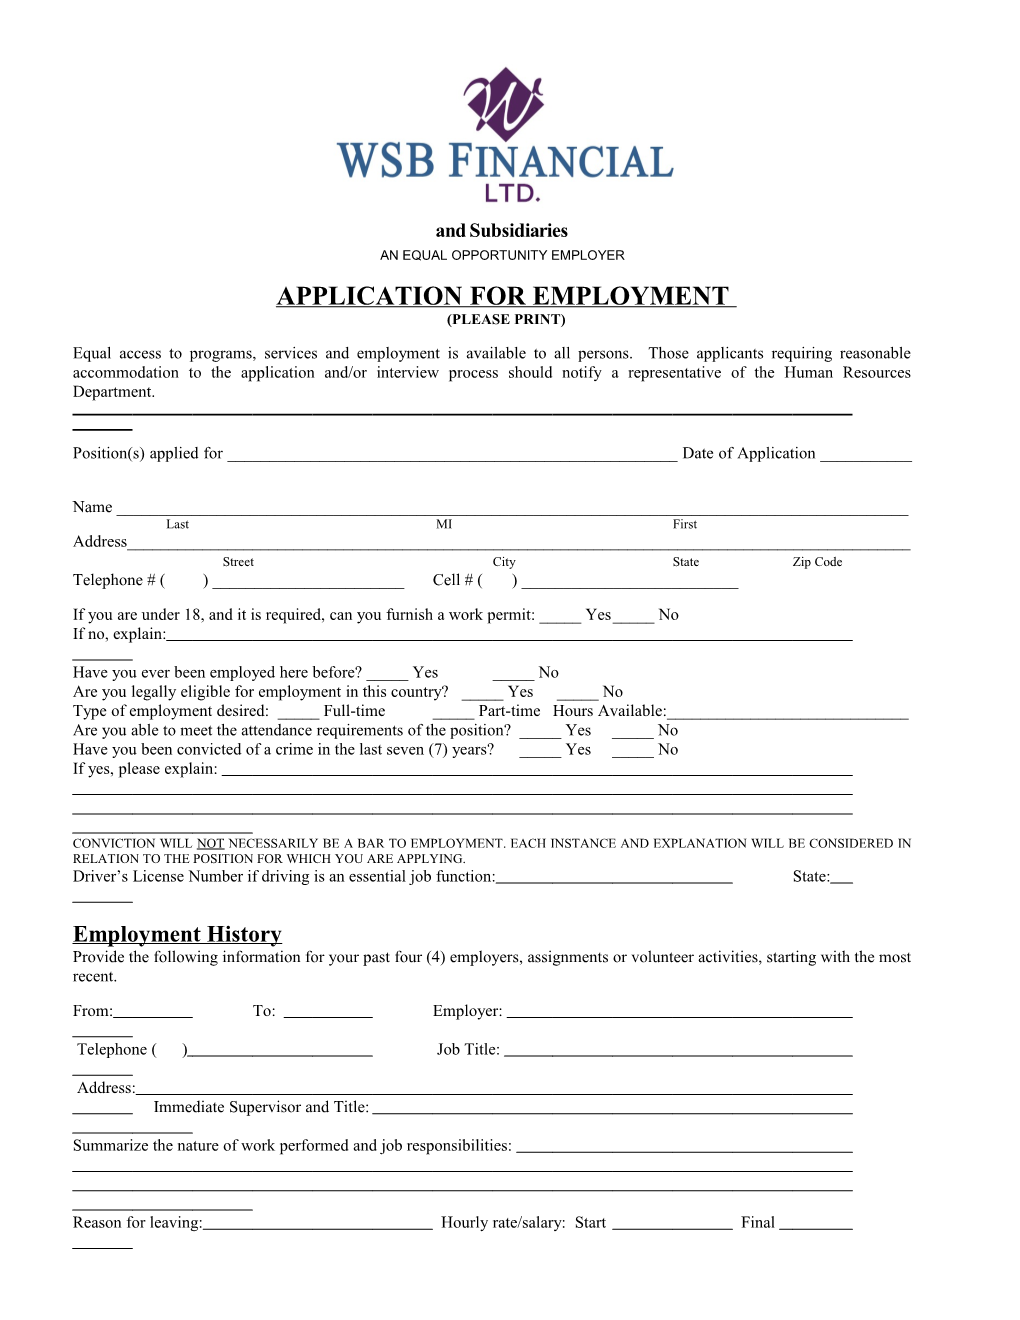 Application for Employment Please Print